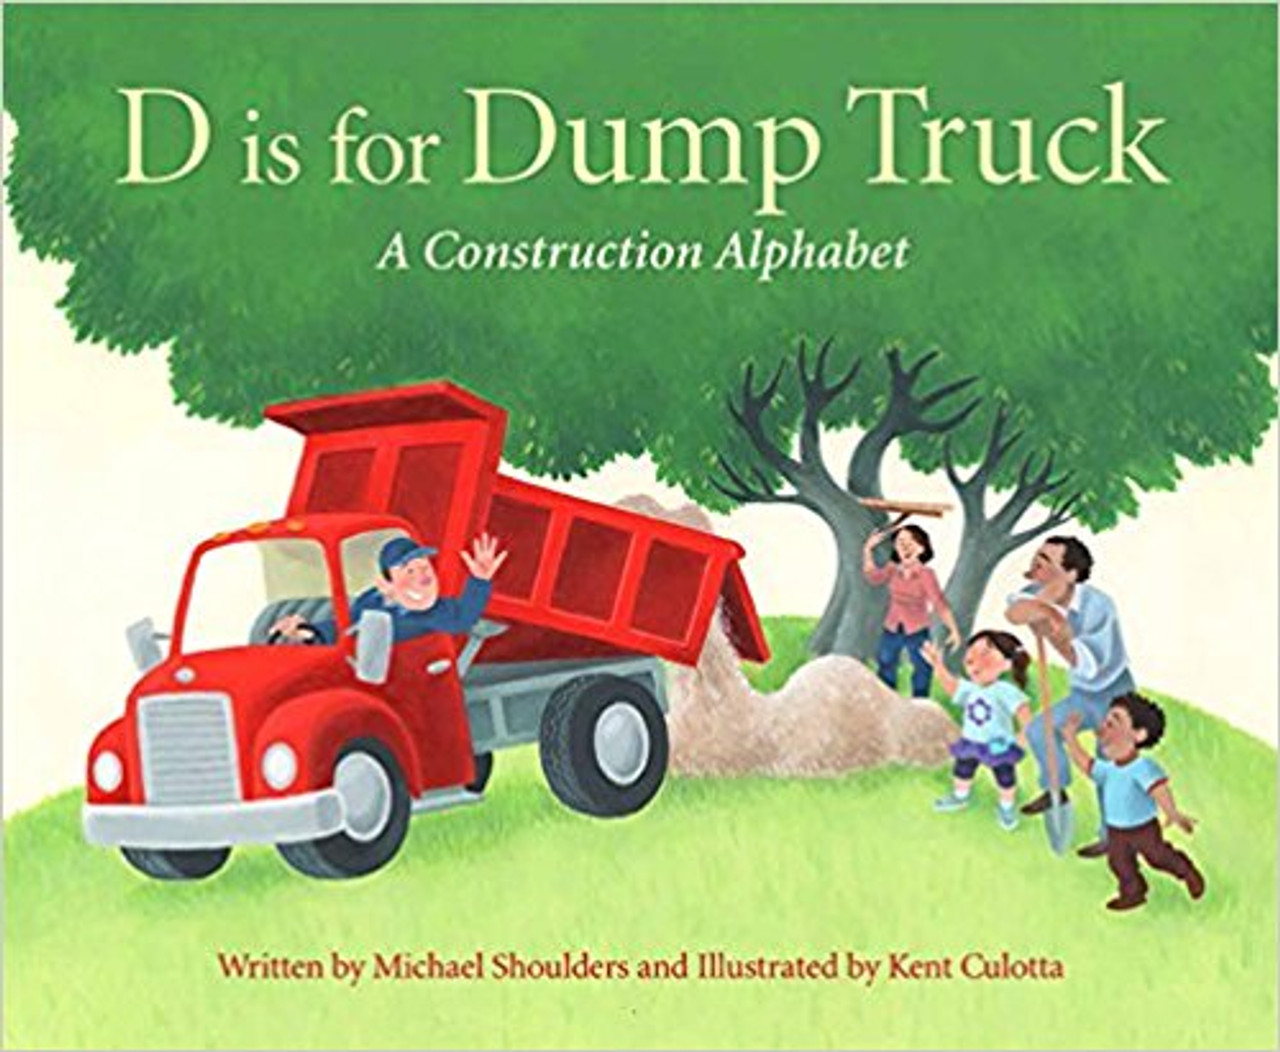 D Is For Sump Truck: A Construction Alphabet (Hard Cover) by Michael Shoulders